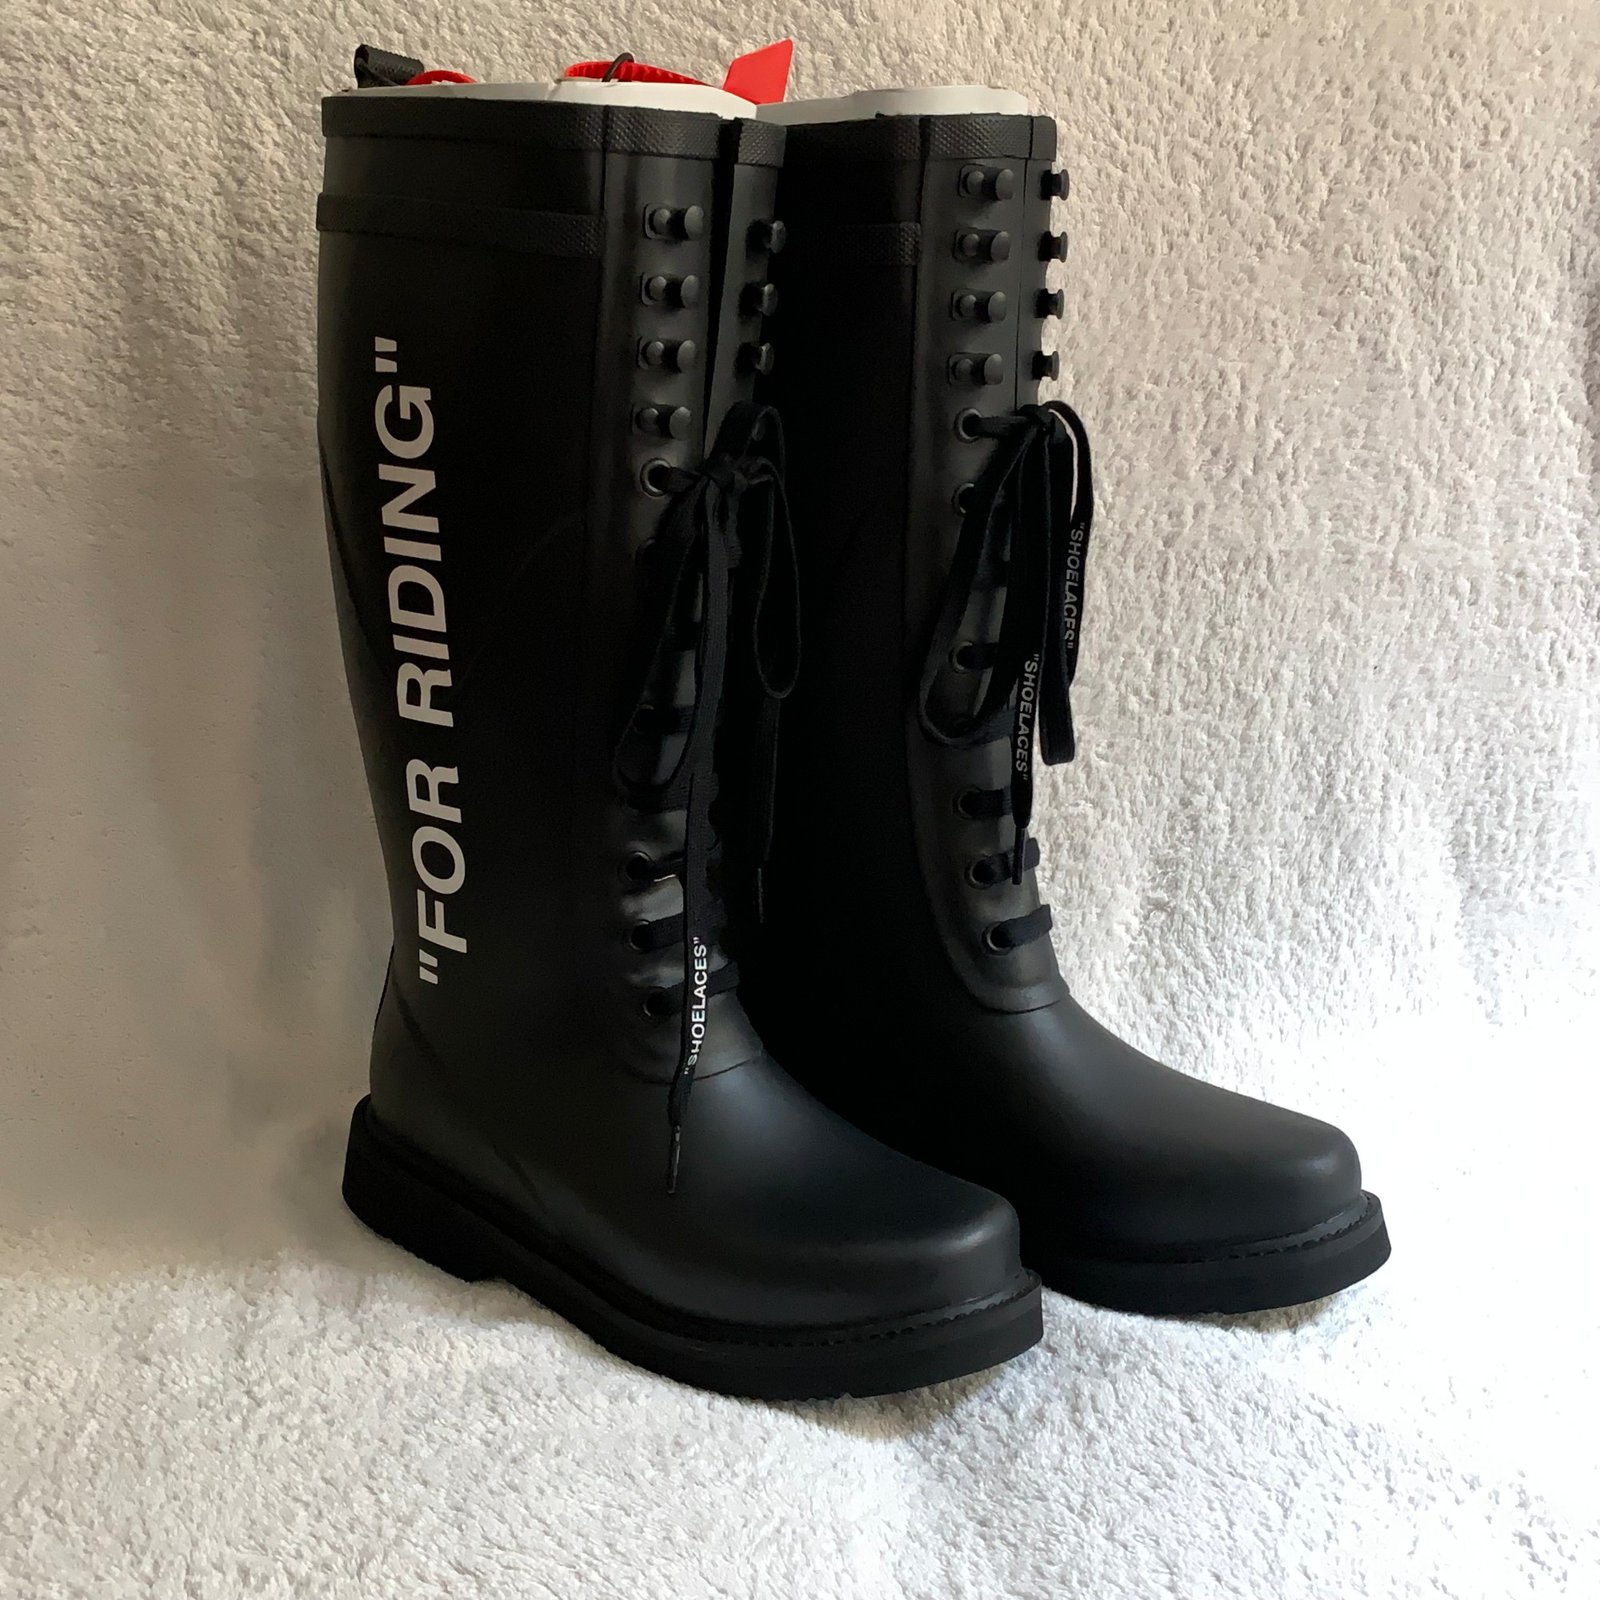 for riding boots off white